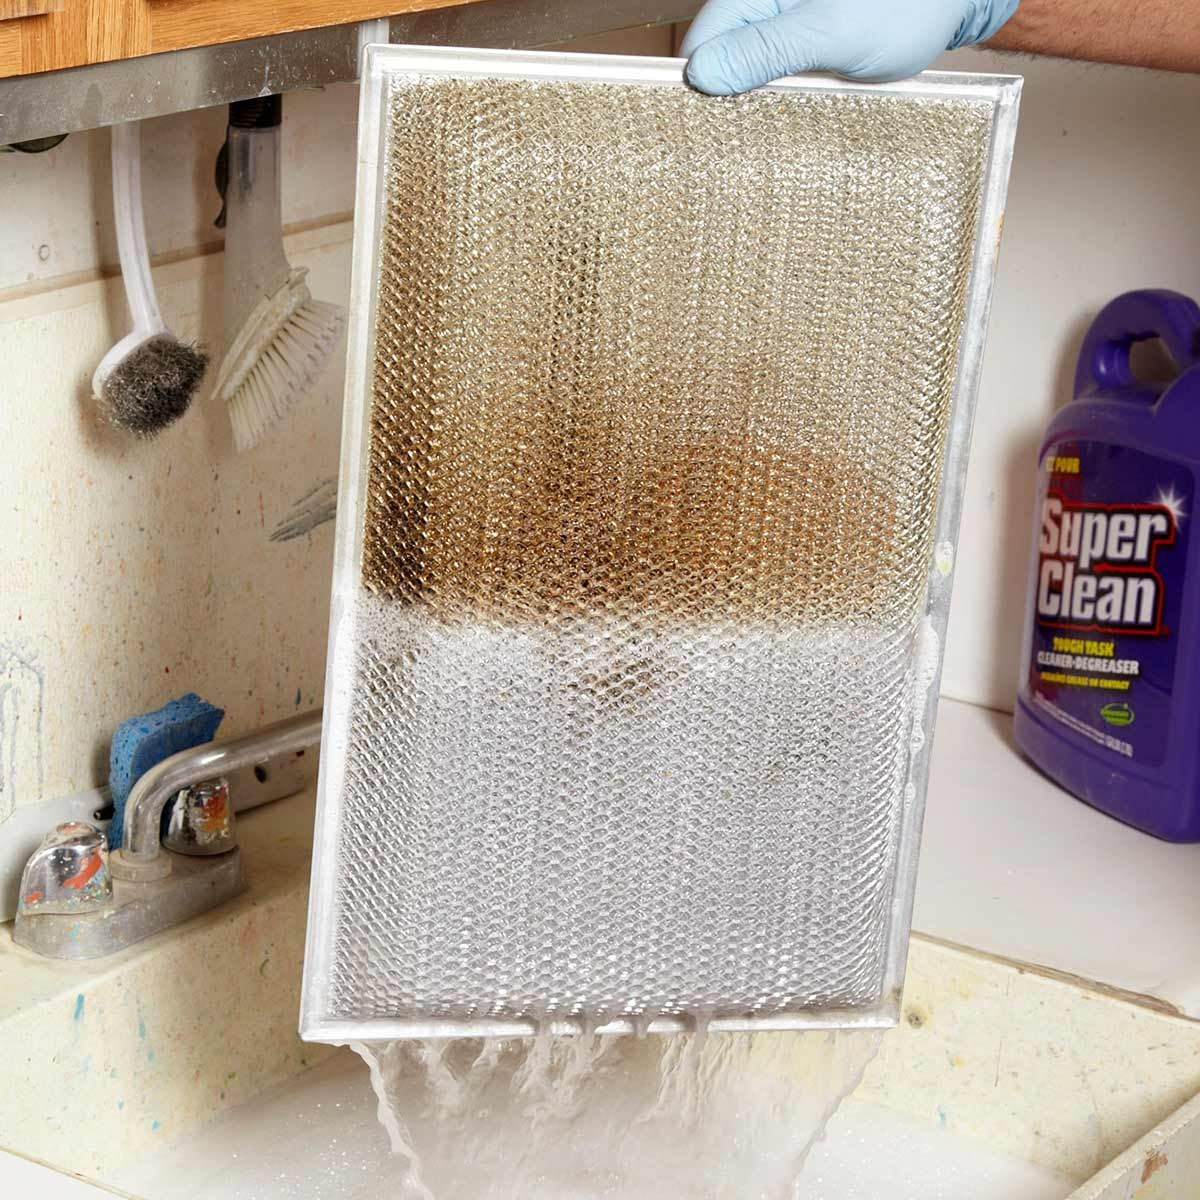 The Best Way To Clean A Greasy Kitchen Range Hood Filter Within Dimensions 1200 X 1200 